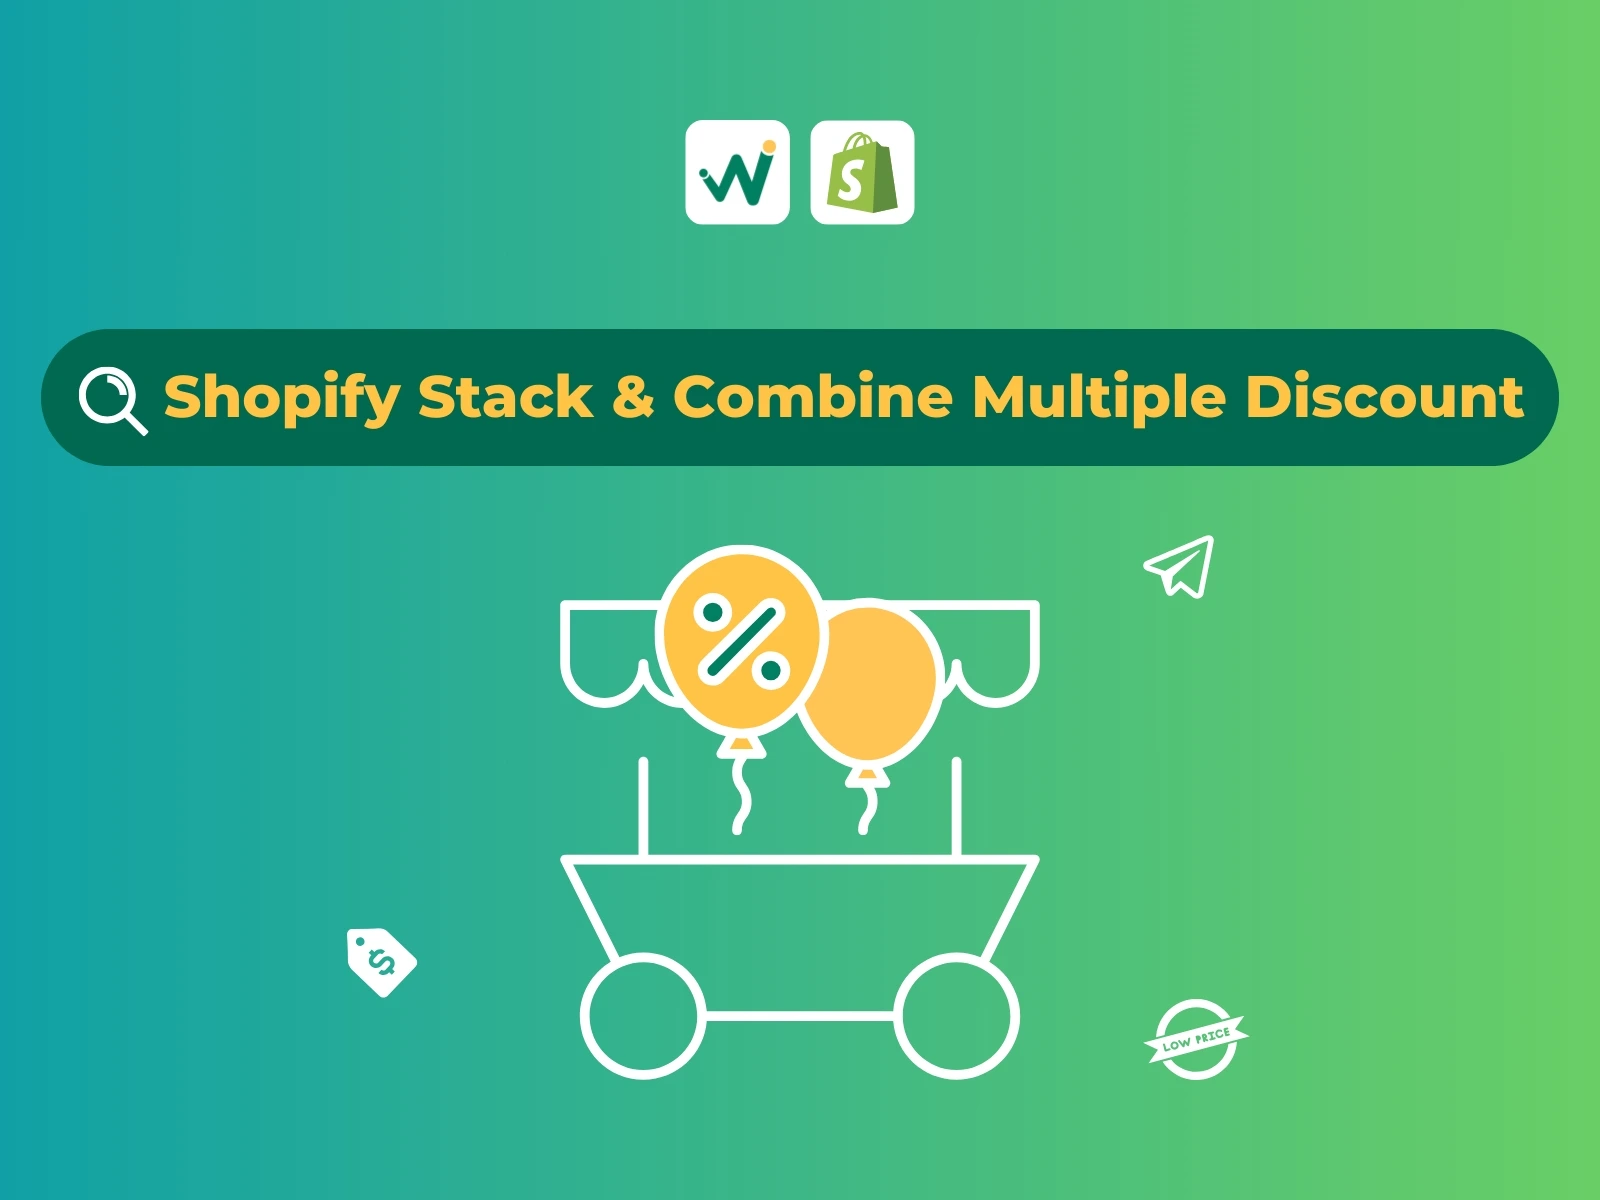 Shopify stack and combine multiple discounts